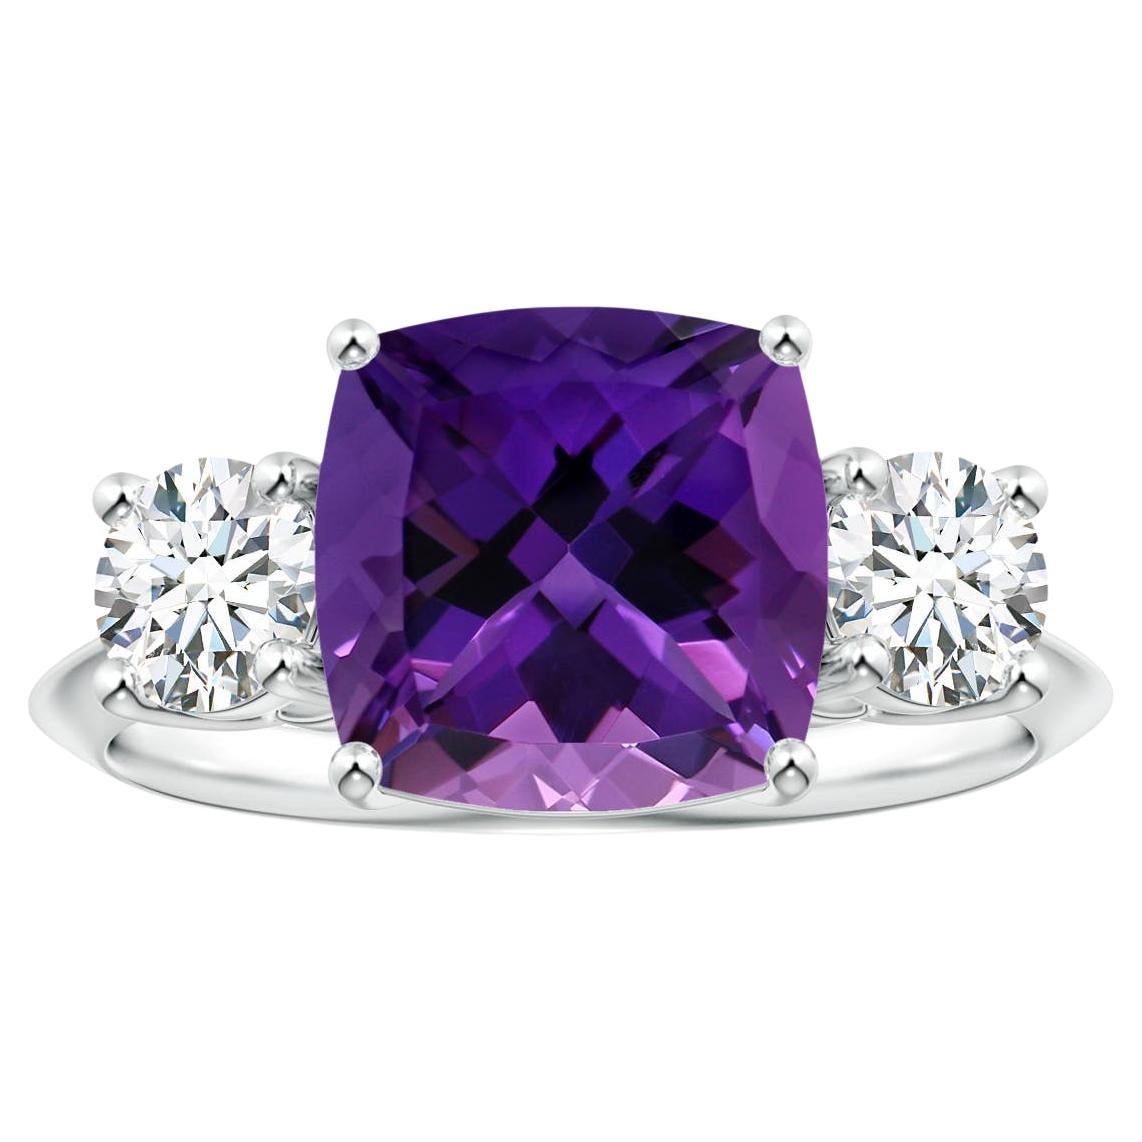 ANGARA 3-Stone GIA Certified Cushion Amethyst Ring in White Gold with Diamonds